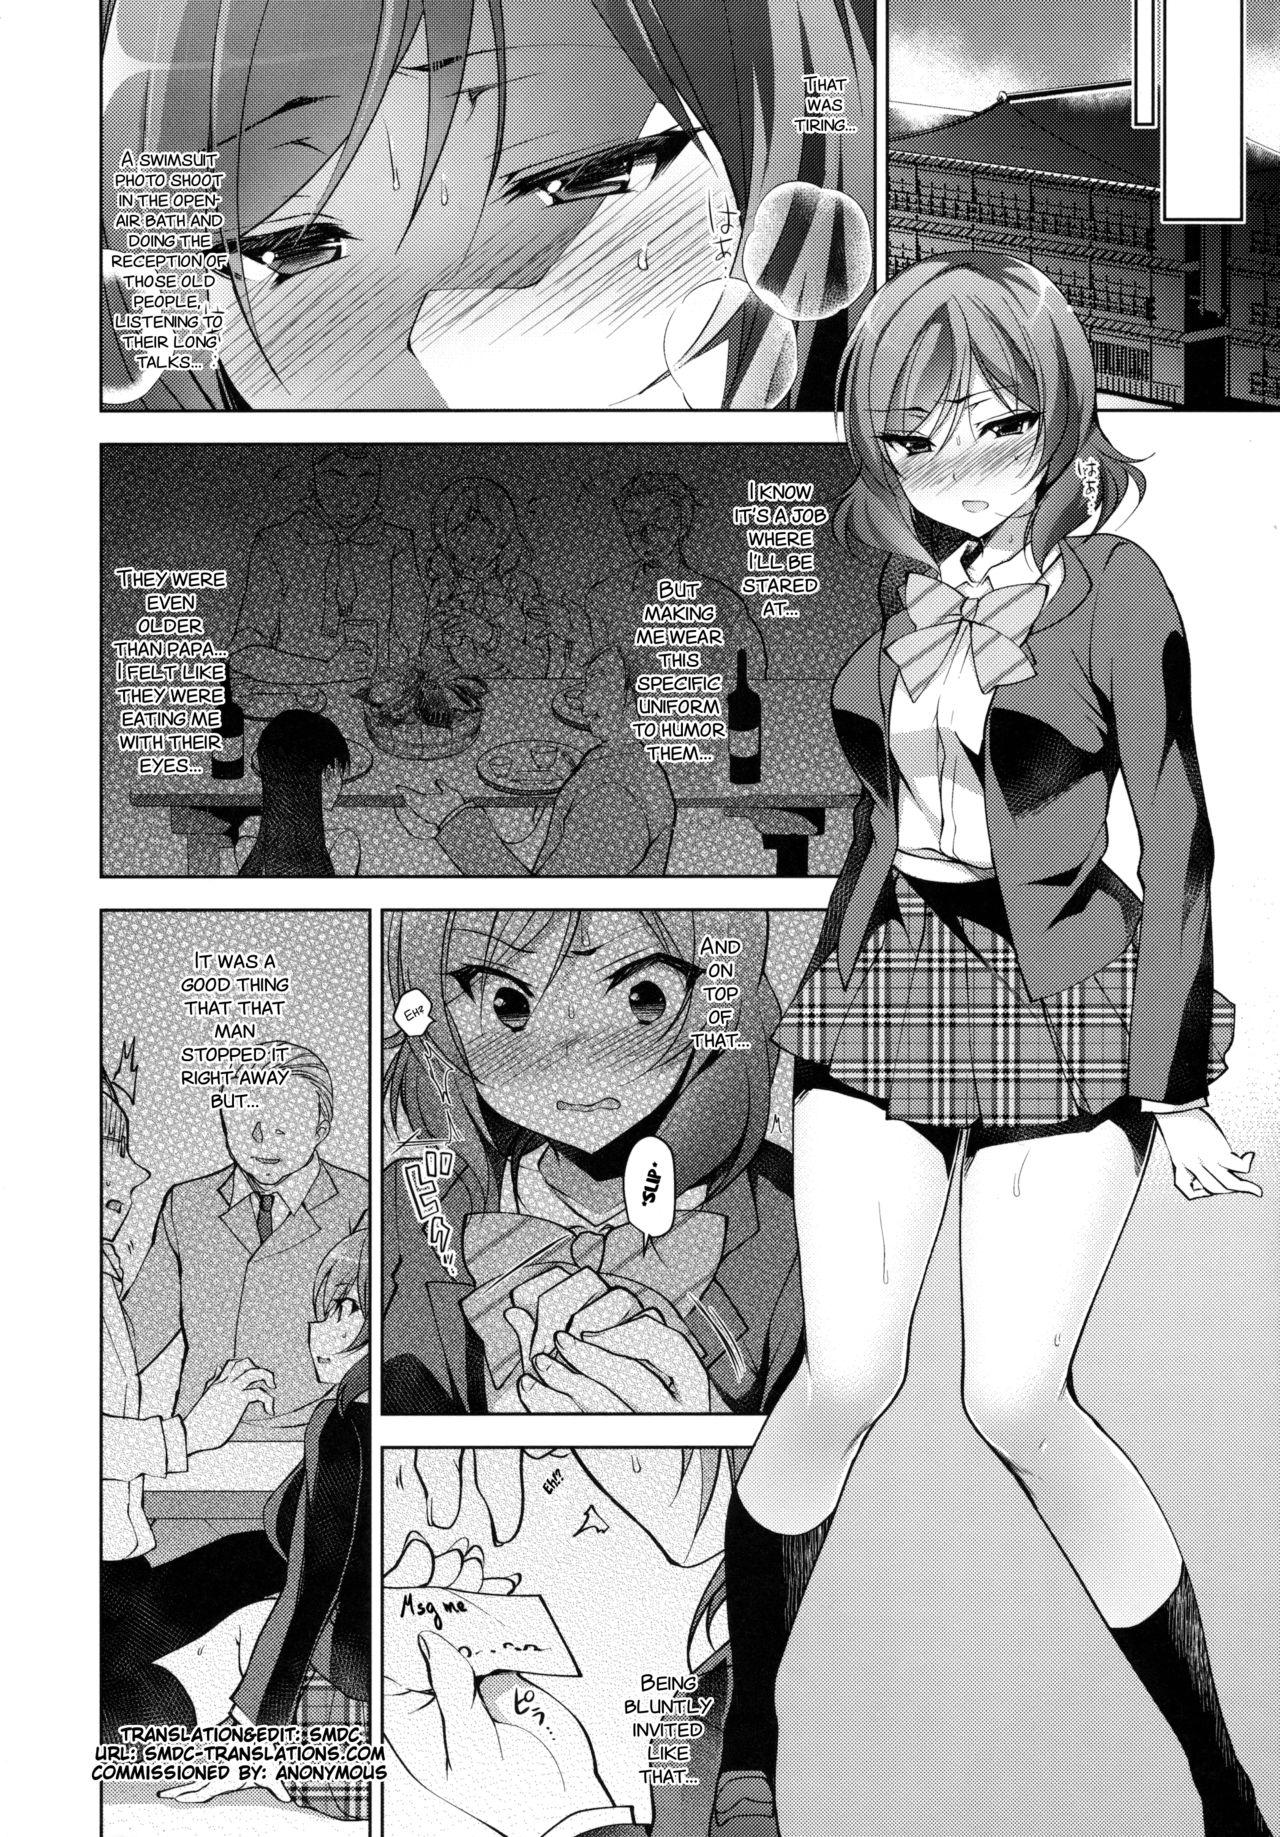 Hardcoresex MAKIPET 5 - Love live Longhair - Page 4